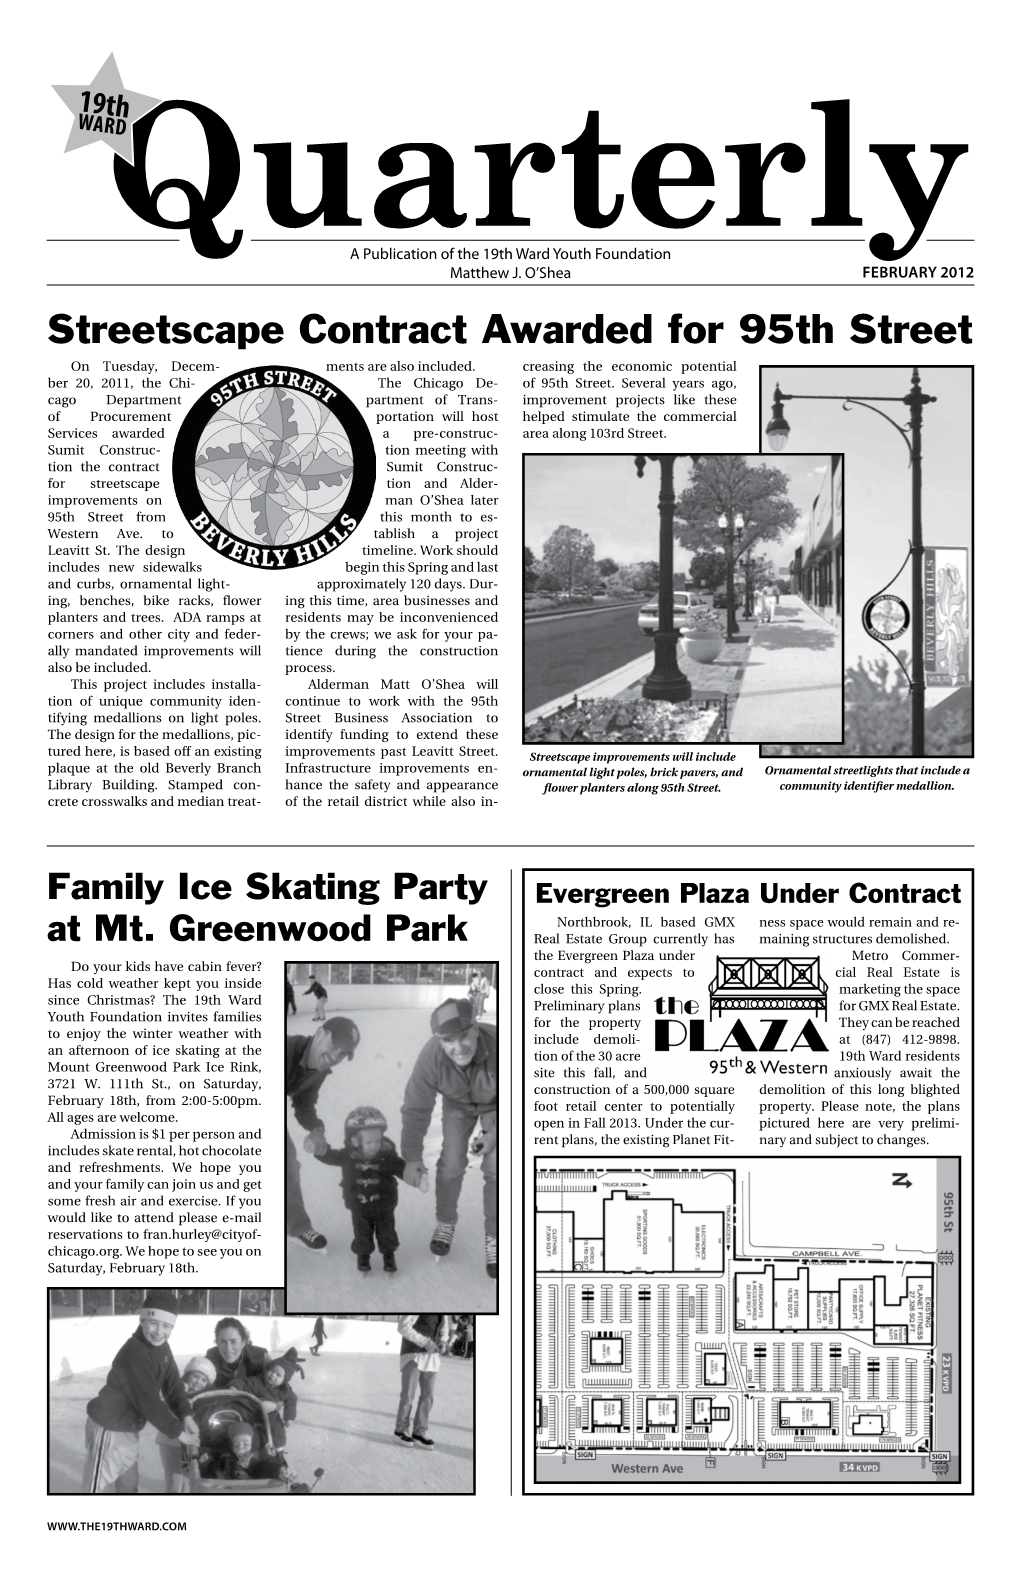 Streetscape Contract Awarded for 95Th Street on Tuesday, Decem- Ments Are Also Included